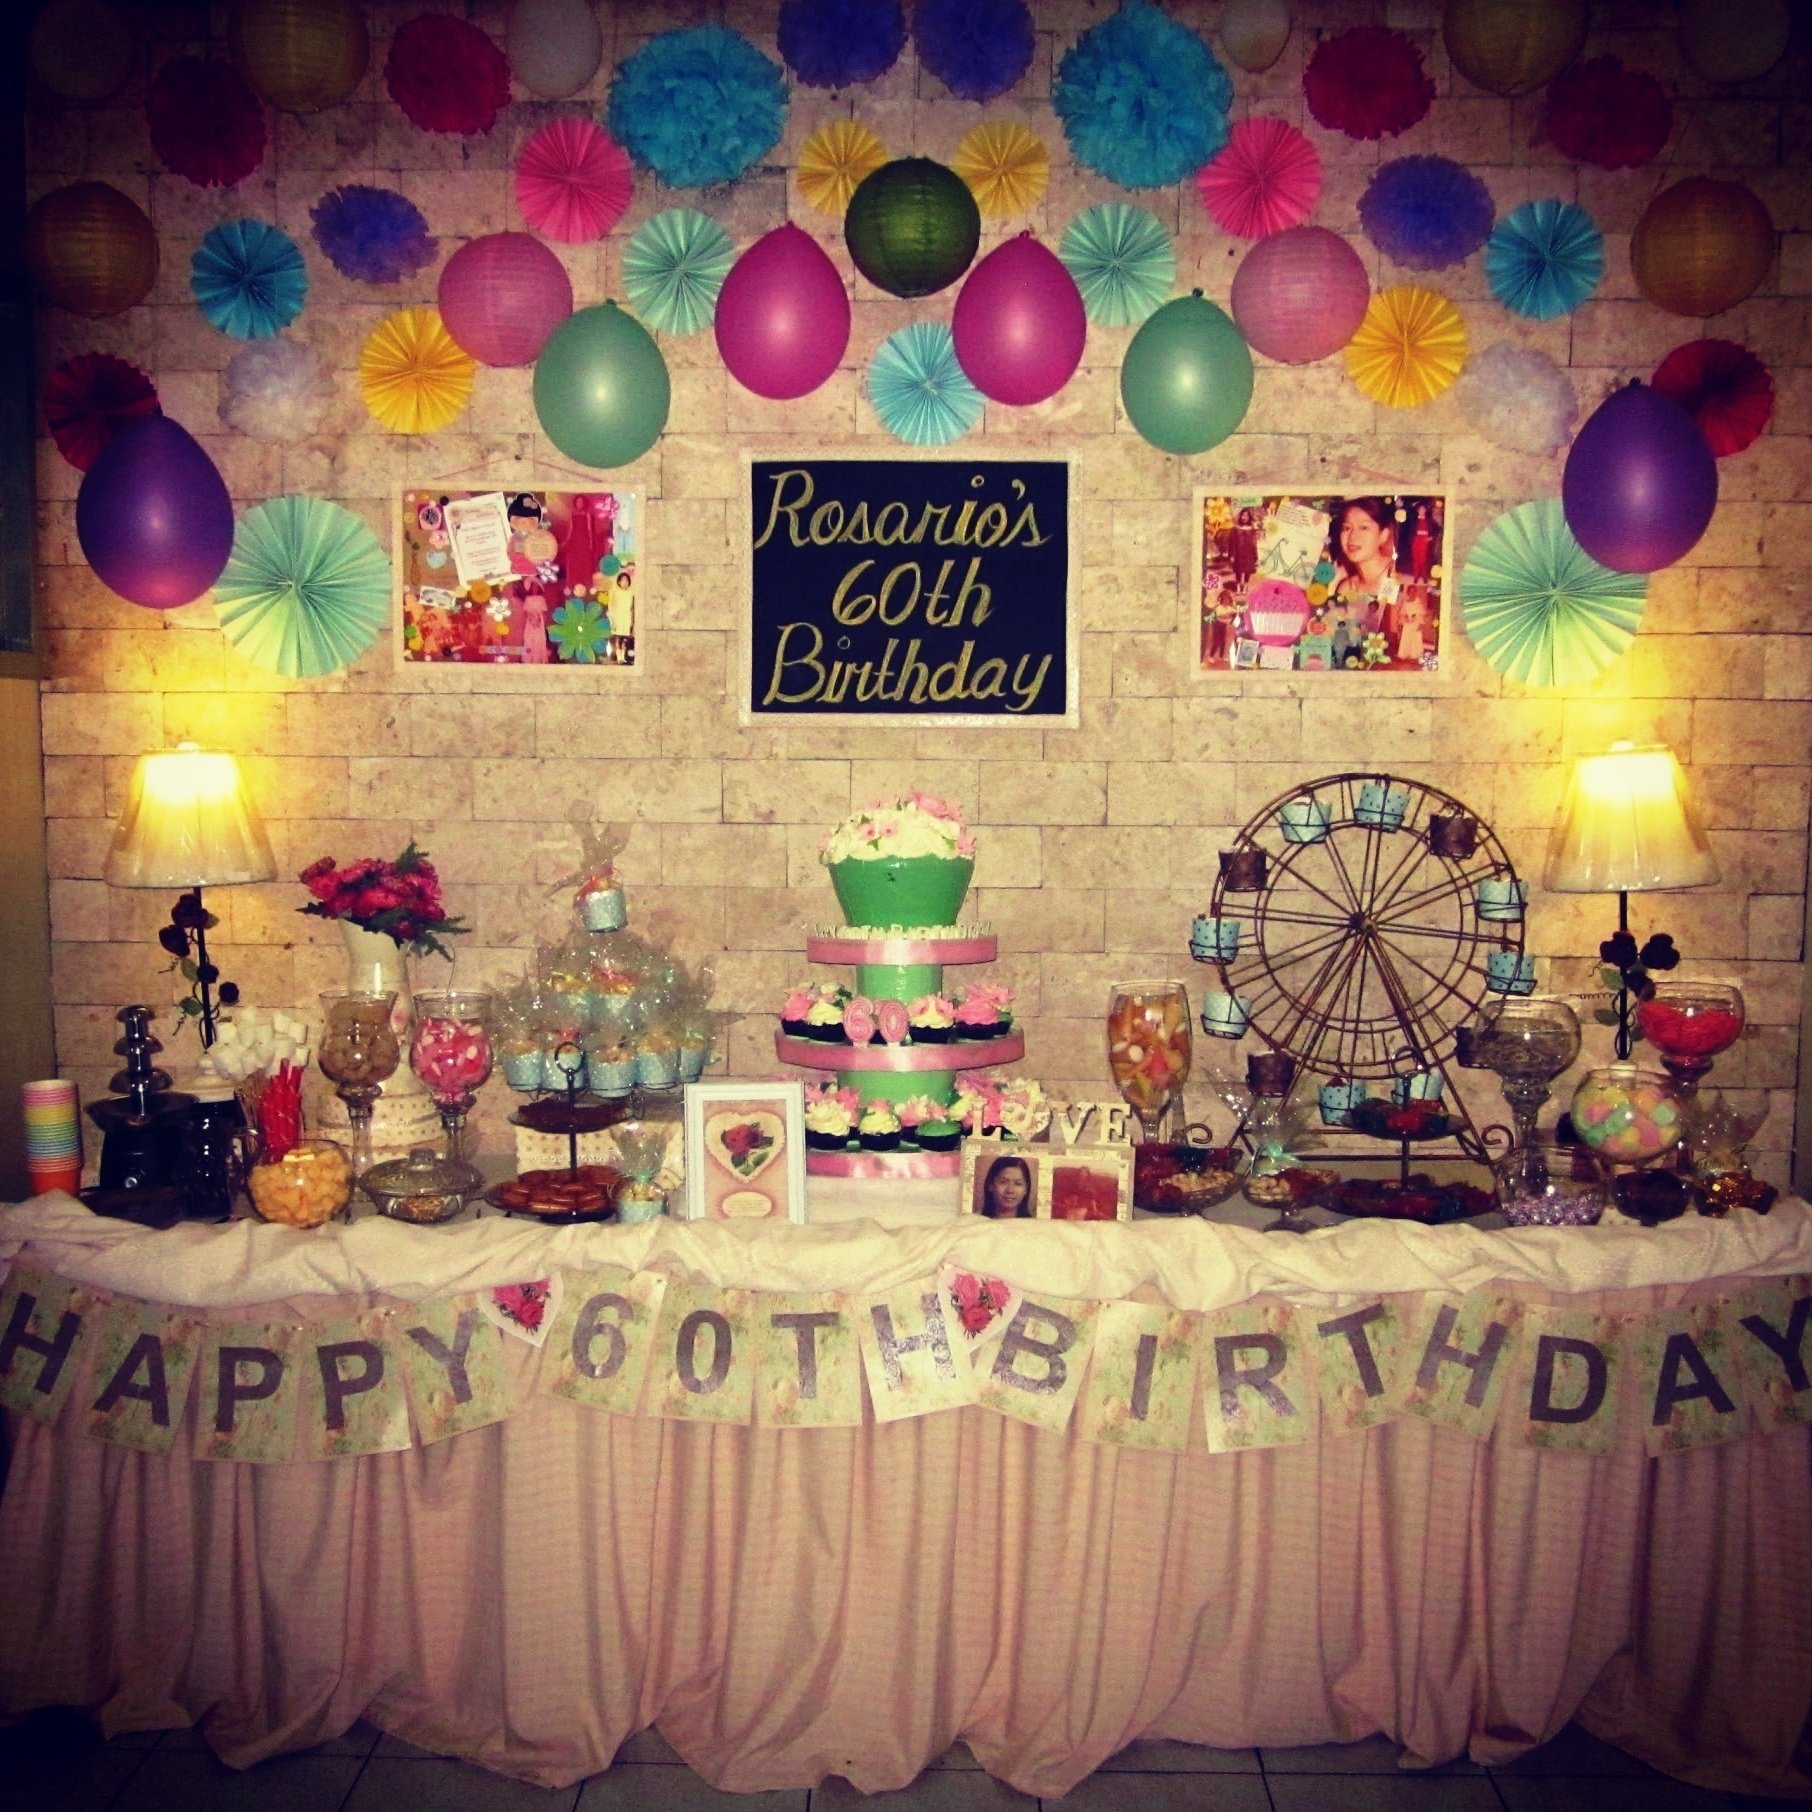 10 Cute Ideas For A 60Th Birthday Party valuable 60th birthday party games ideas 60th for mom plus mum gift 2 2022